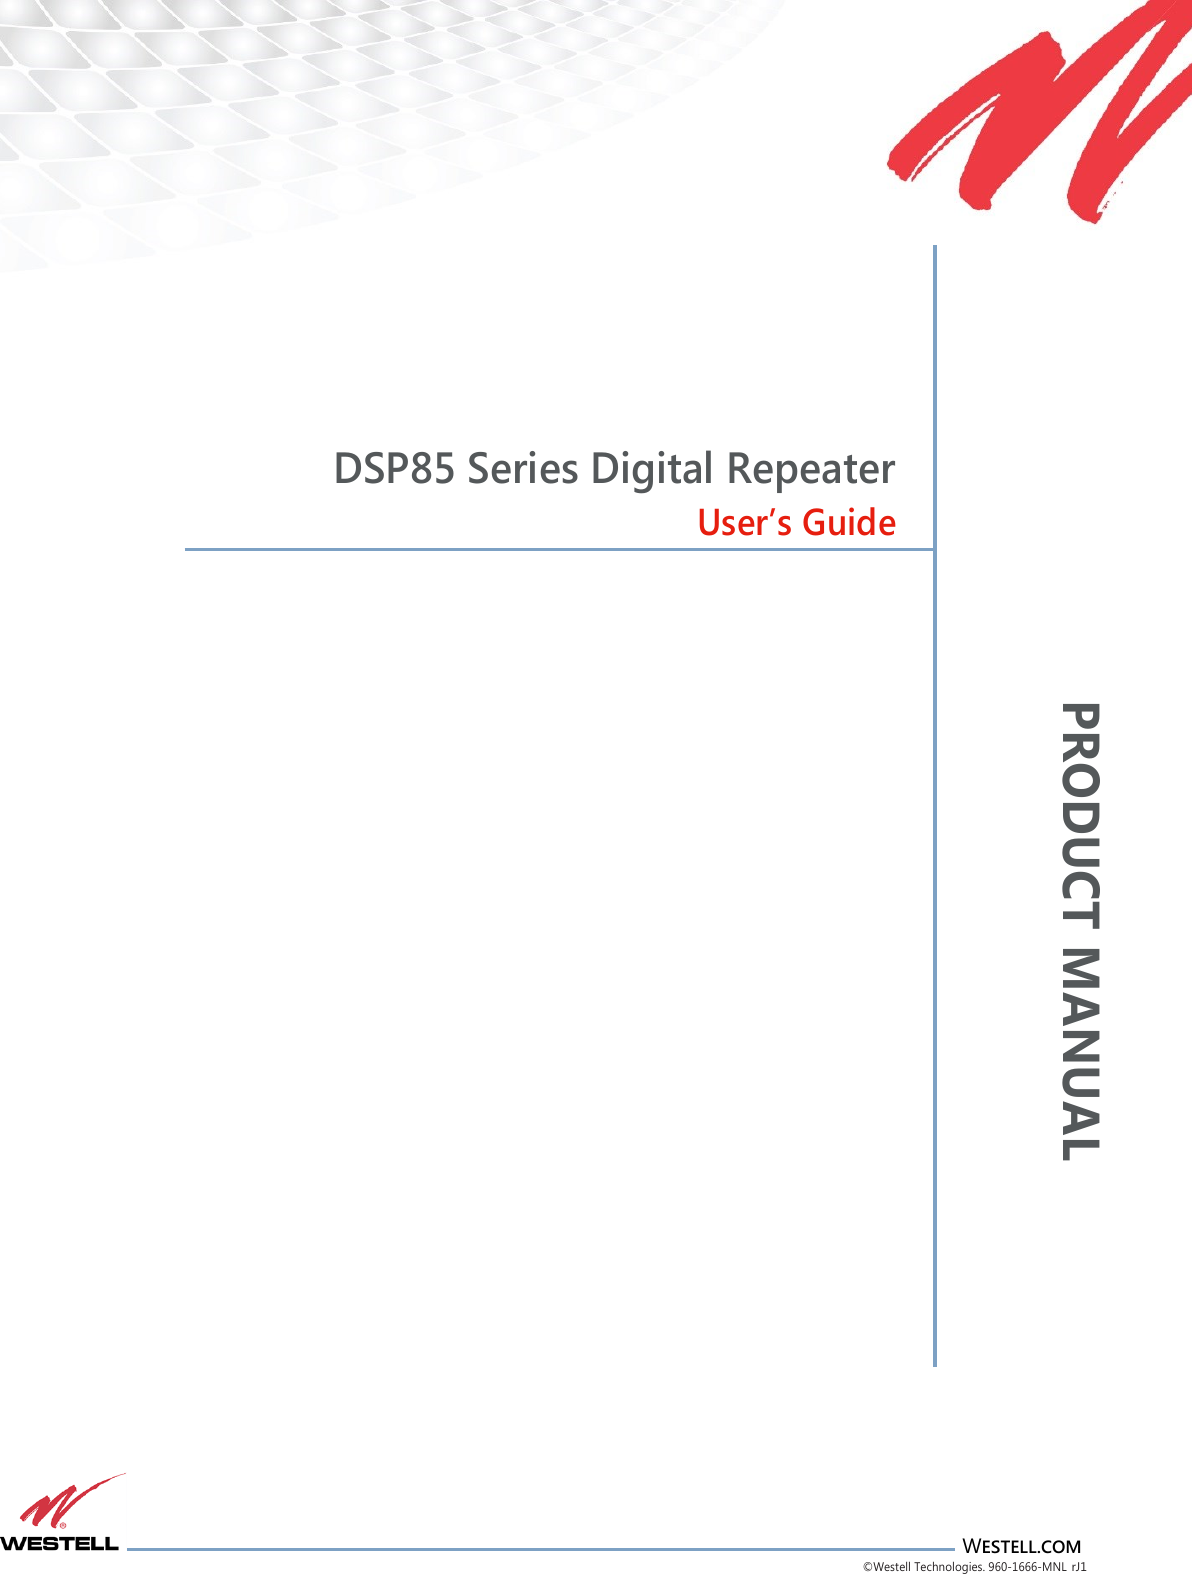 PRODUCT MANUAL                       WESTELL.COM ©Westell Technologies. 960-1666-MNL rJ1           DSP85 Series Digital Repeater User’s Guide                                         